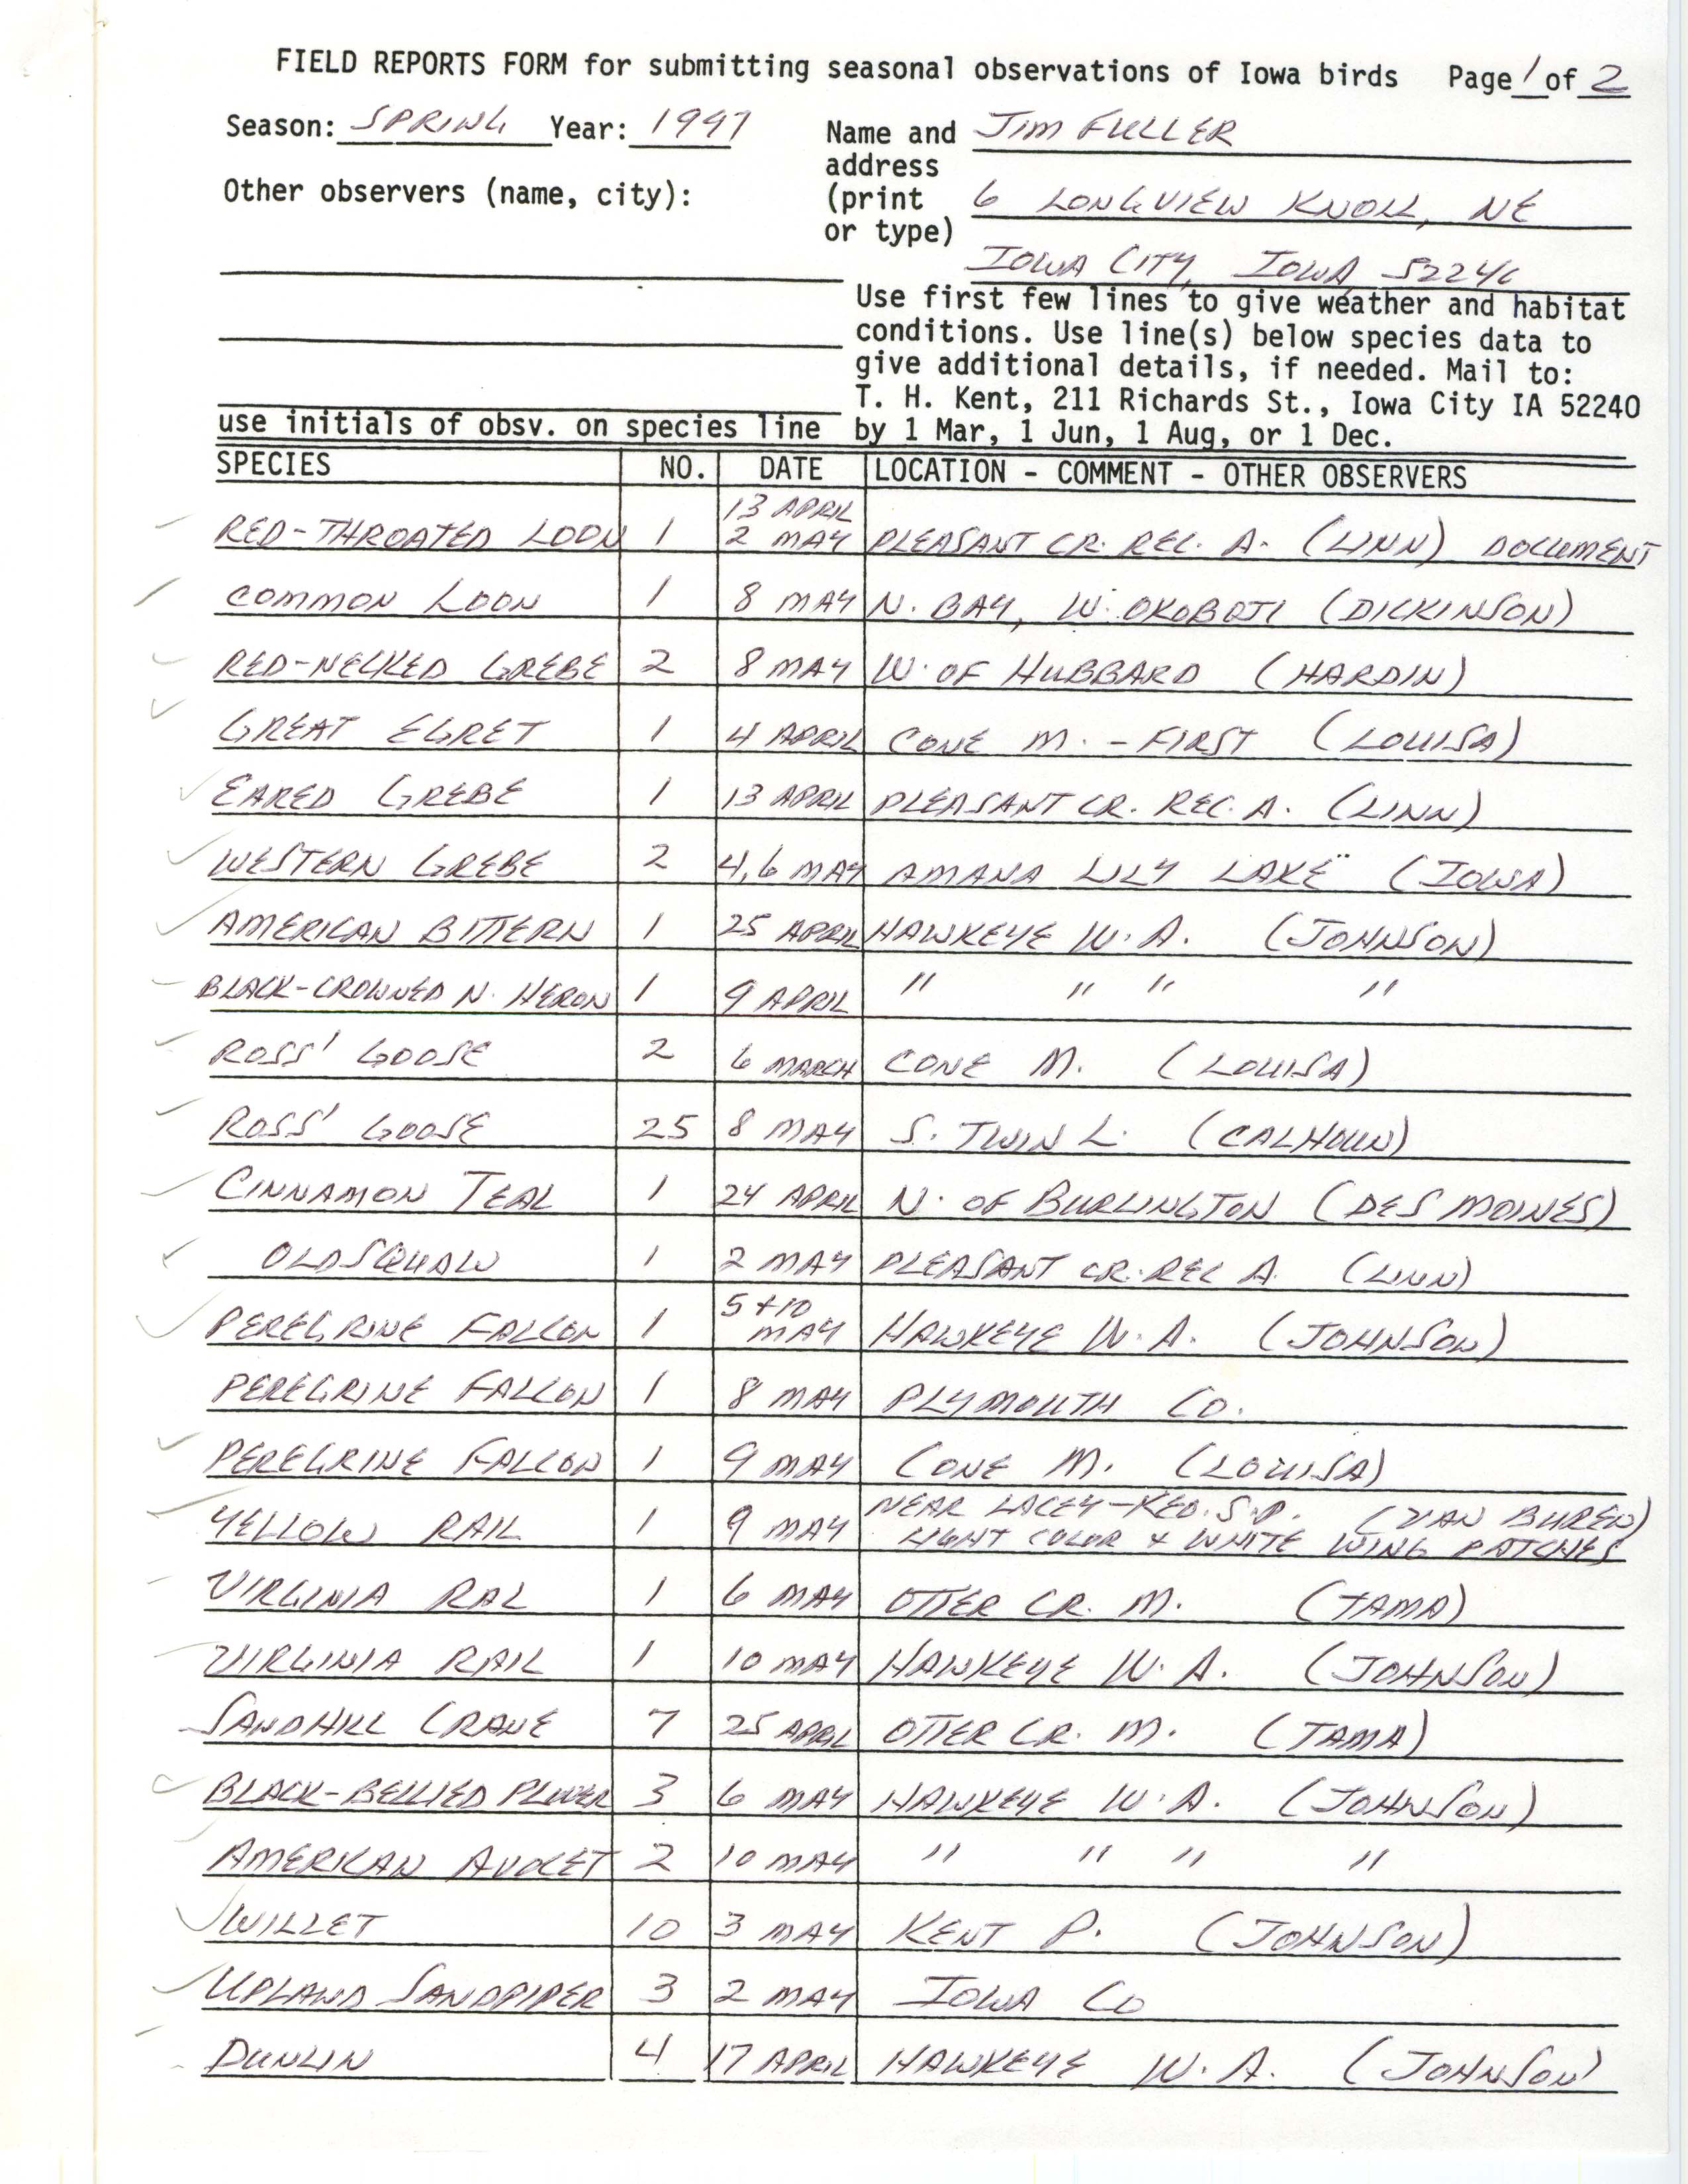 Field reports form for submitting seasonal observations of Iowa birds, James L. Fuller, spring 1997